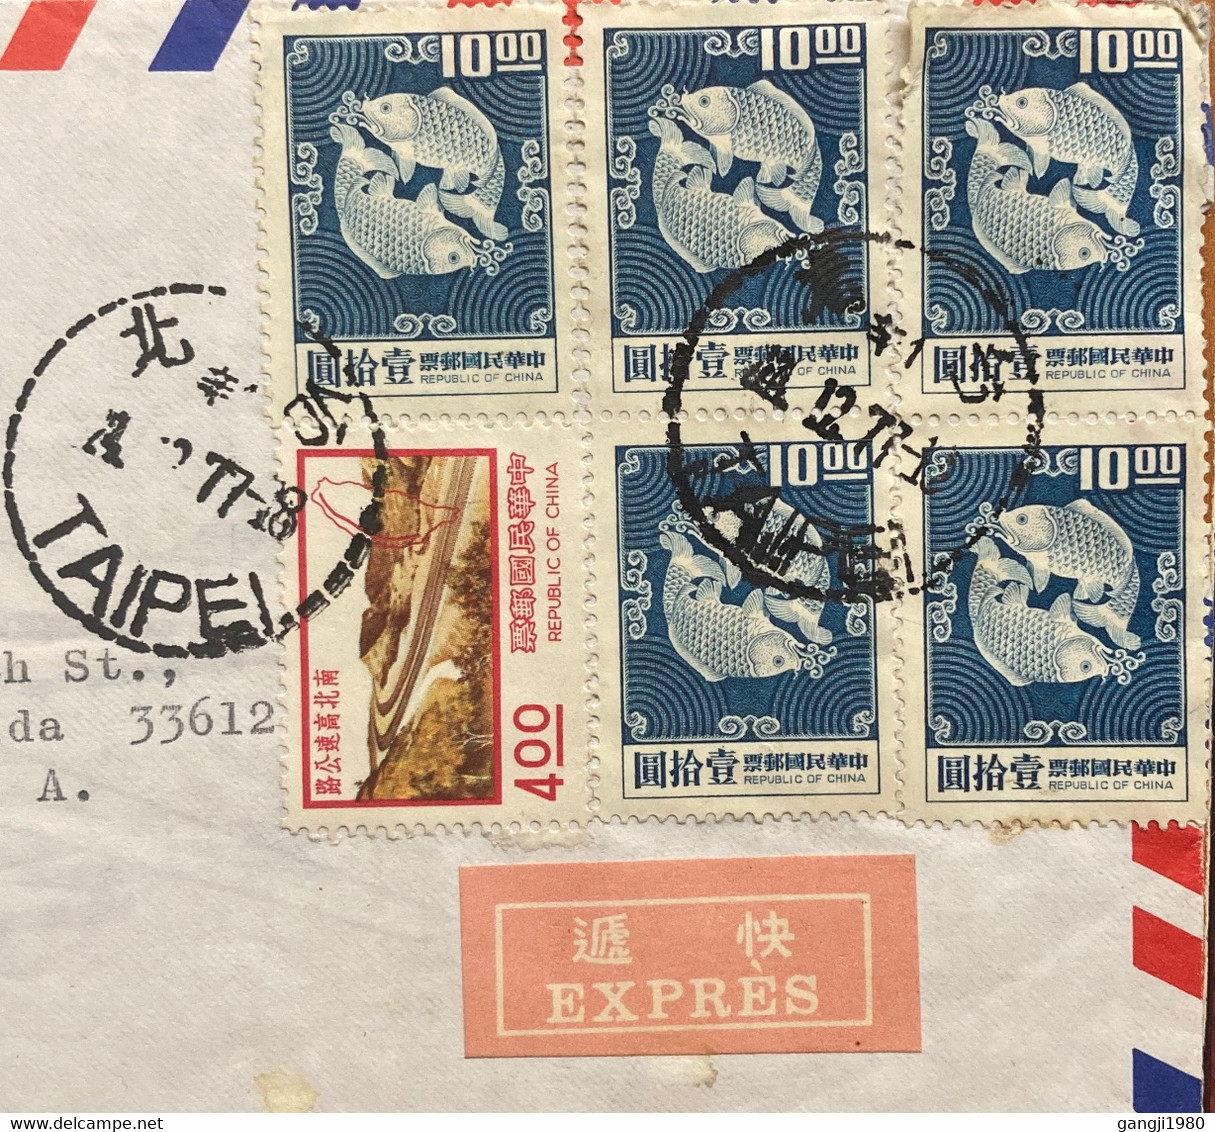 CHINA TAIWAN-1977, VIGNETTE “EXPRESS” LABEL USED COVER TO USA ,TUNG FOOK TRADING CO.ADVT PICTURE MATCHING FISH, SAME STA - Covers & Documents